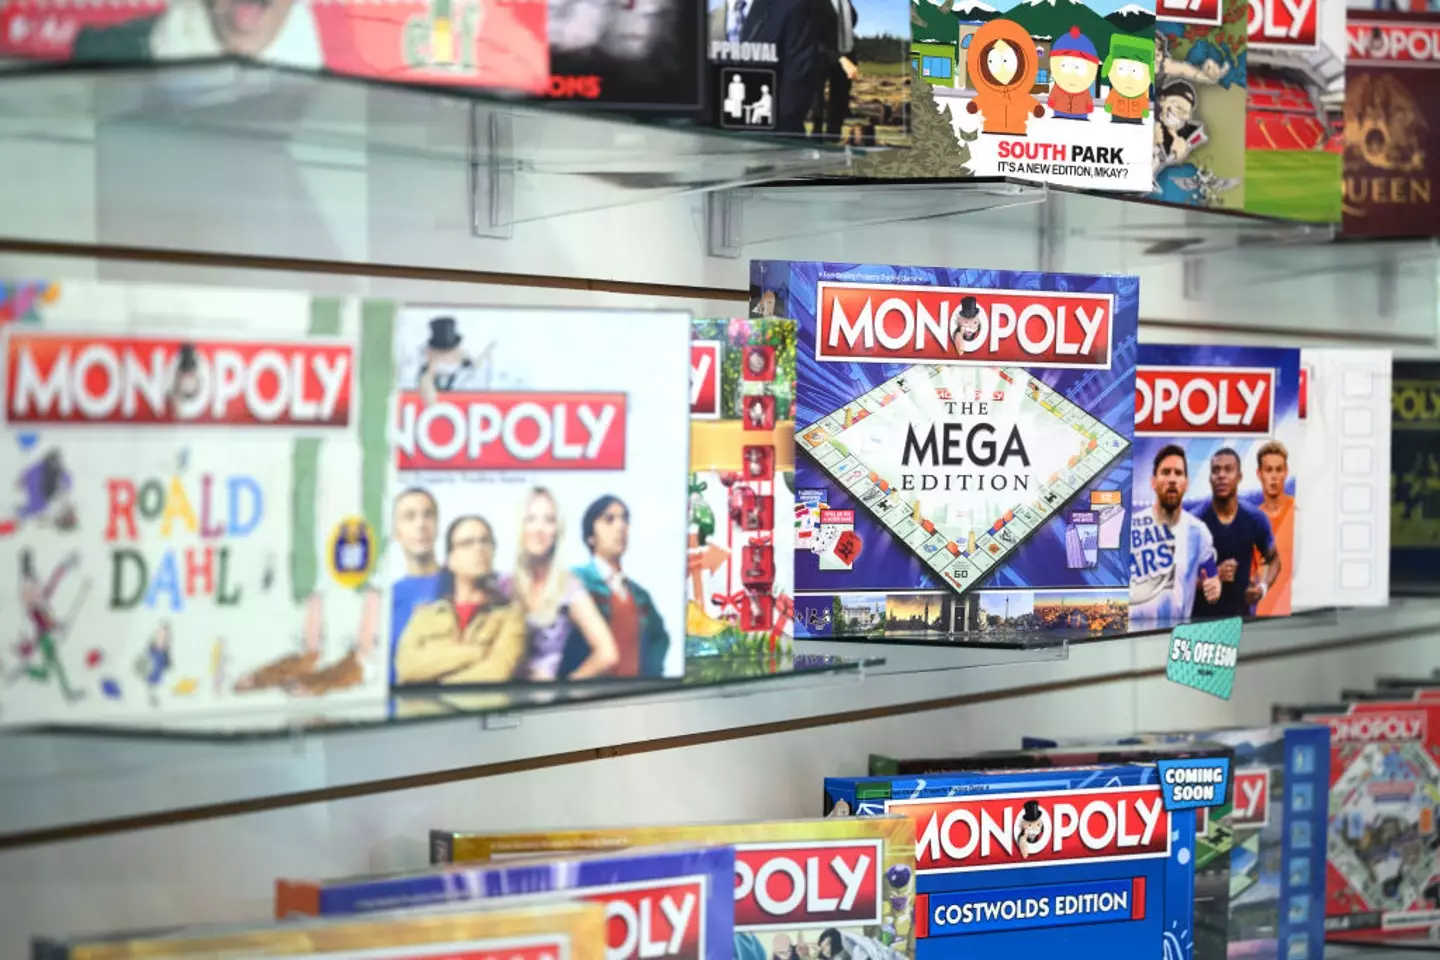 There are a few tips and tricks if you want to play Monopoly like a pro.